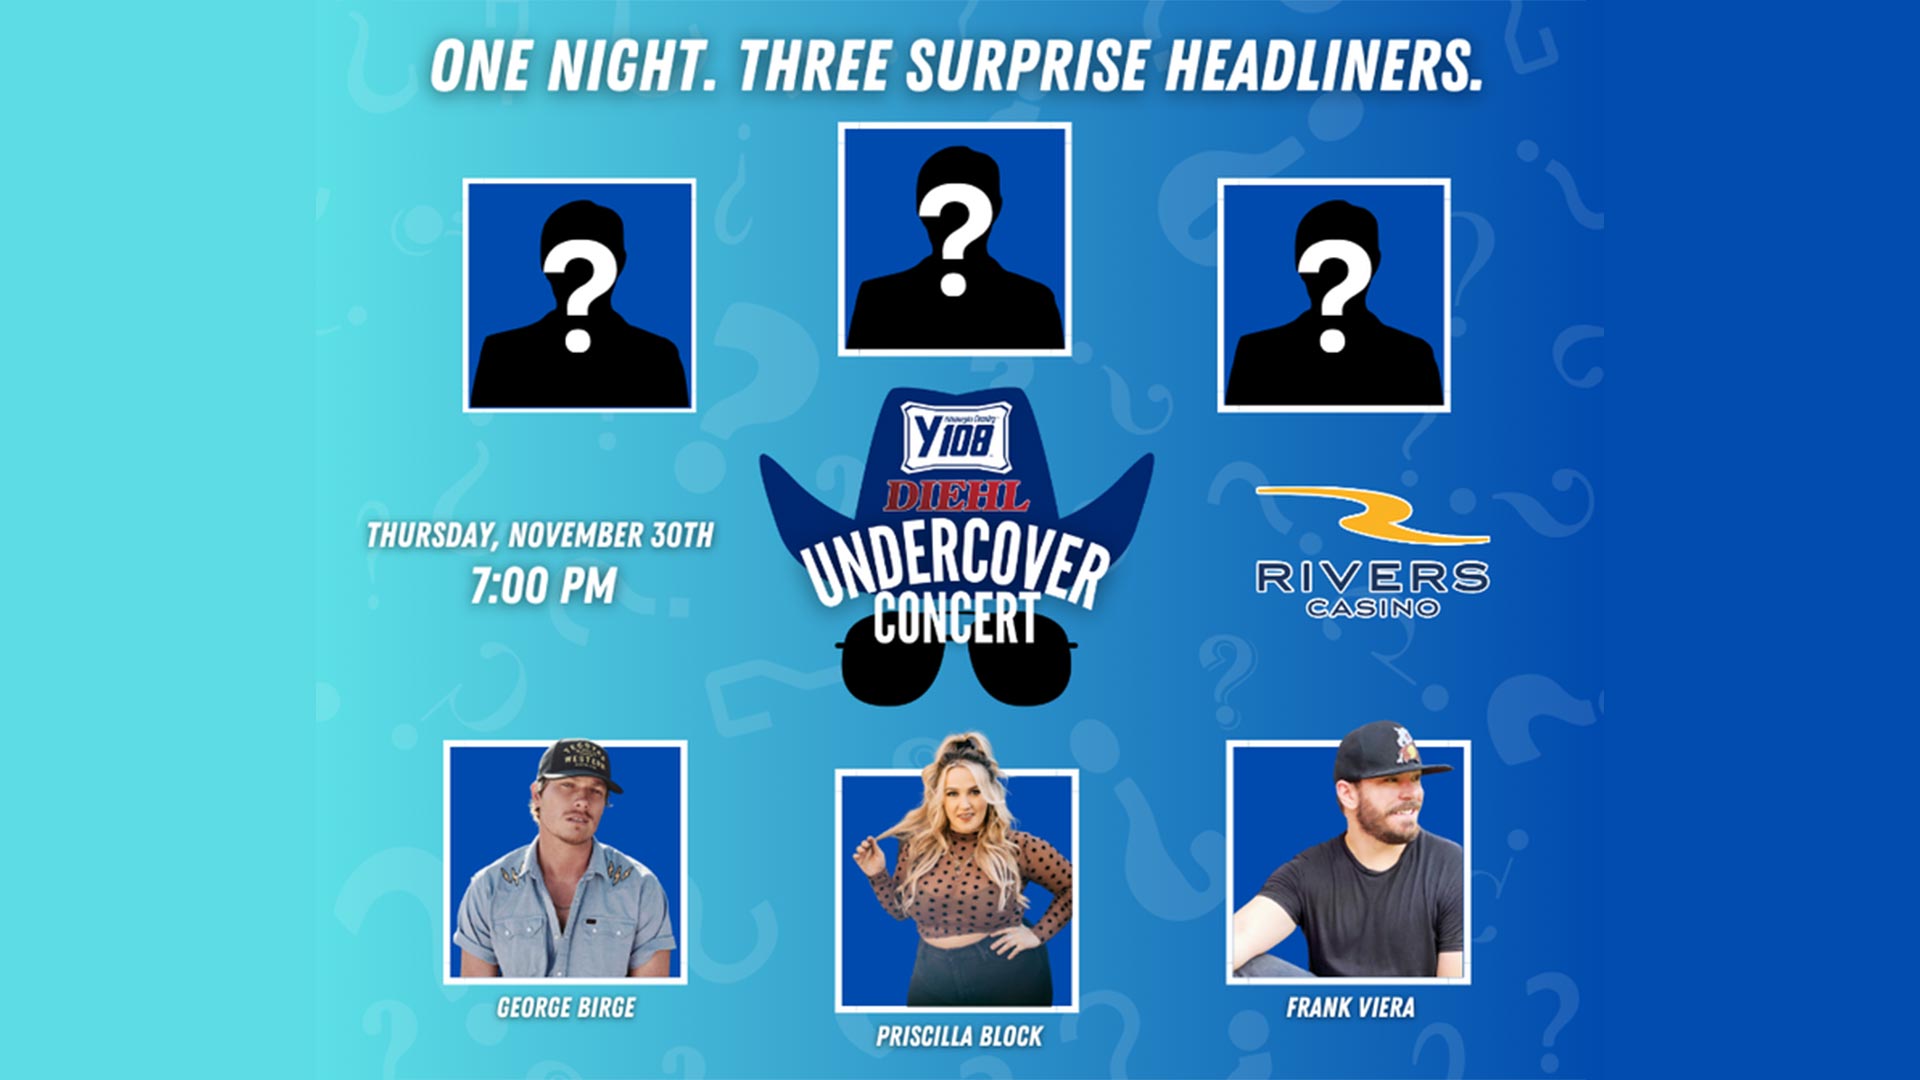 y108-undercover-concert-hampton-beer-outlet-thumbnail